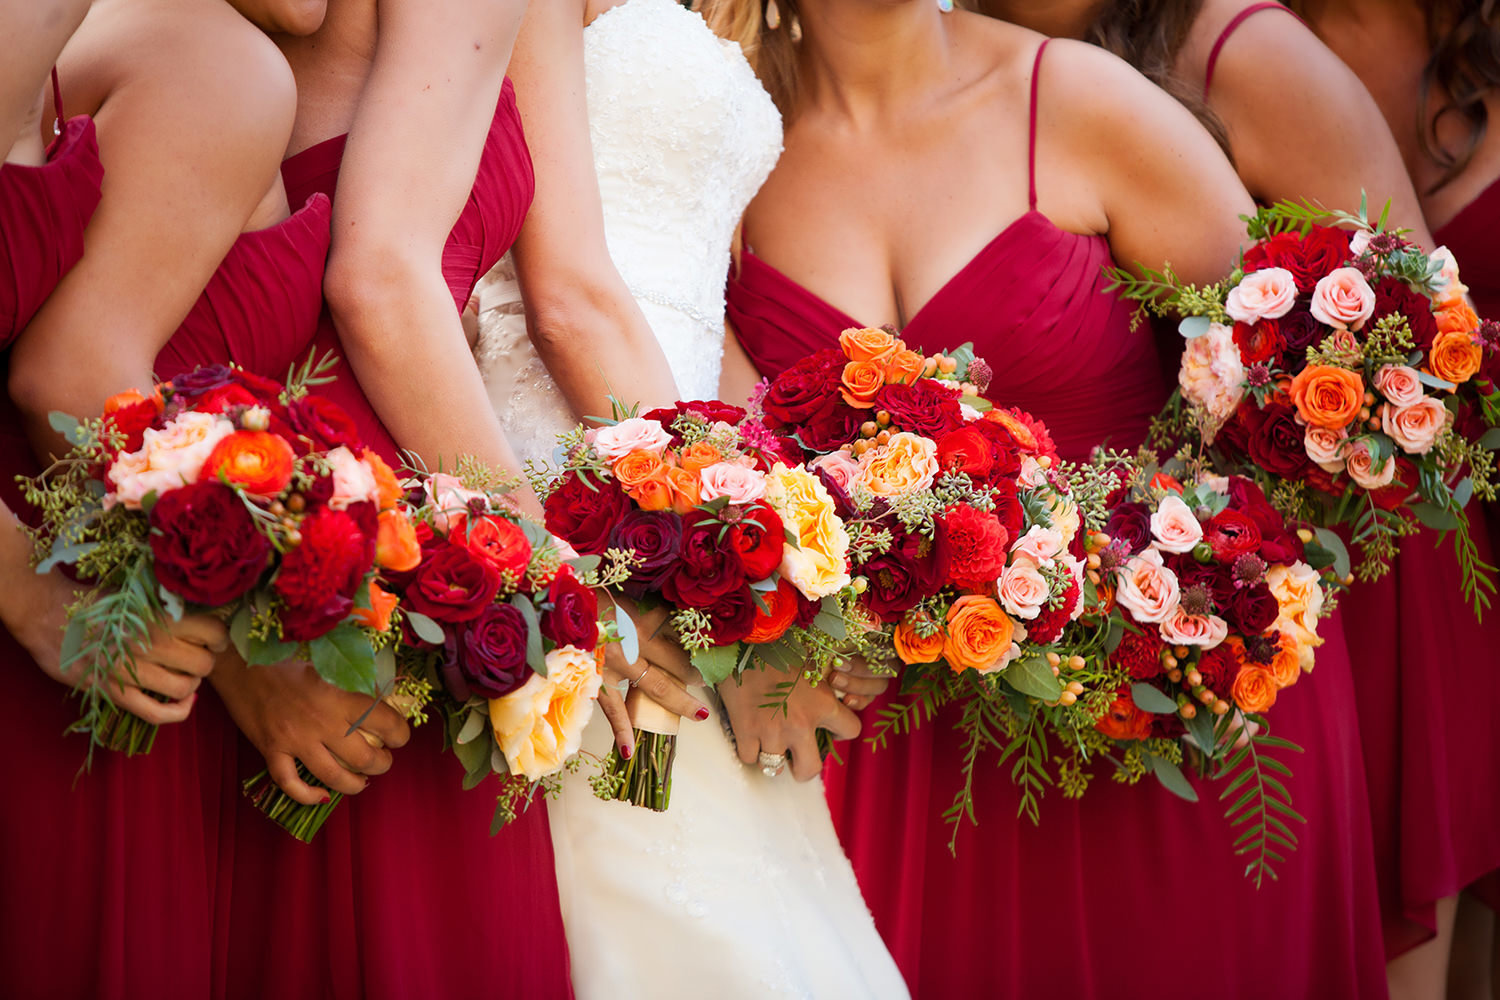 Brightly colored wedding bouquets and dresses